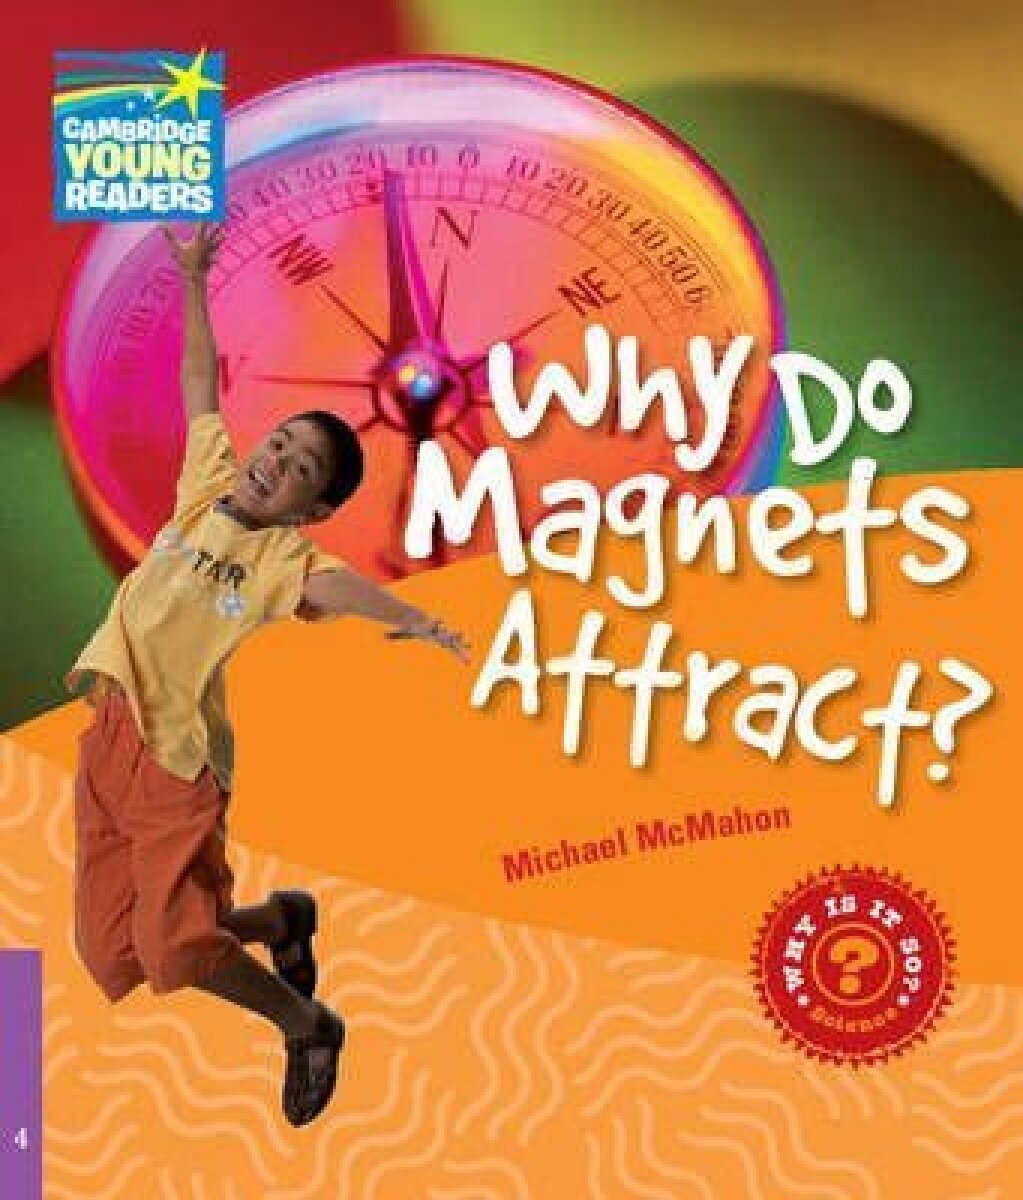 Factbooks: Why is it so? Level 4 Why Do Magnets Attract?